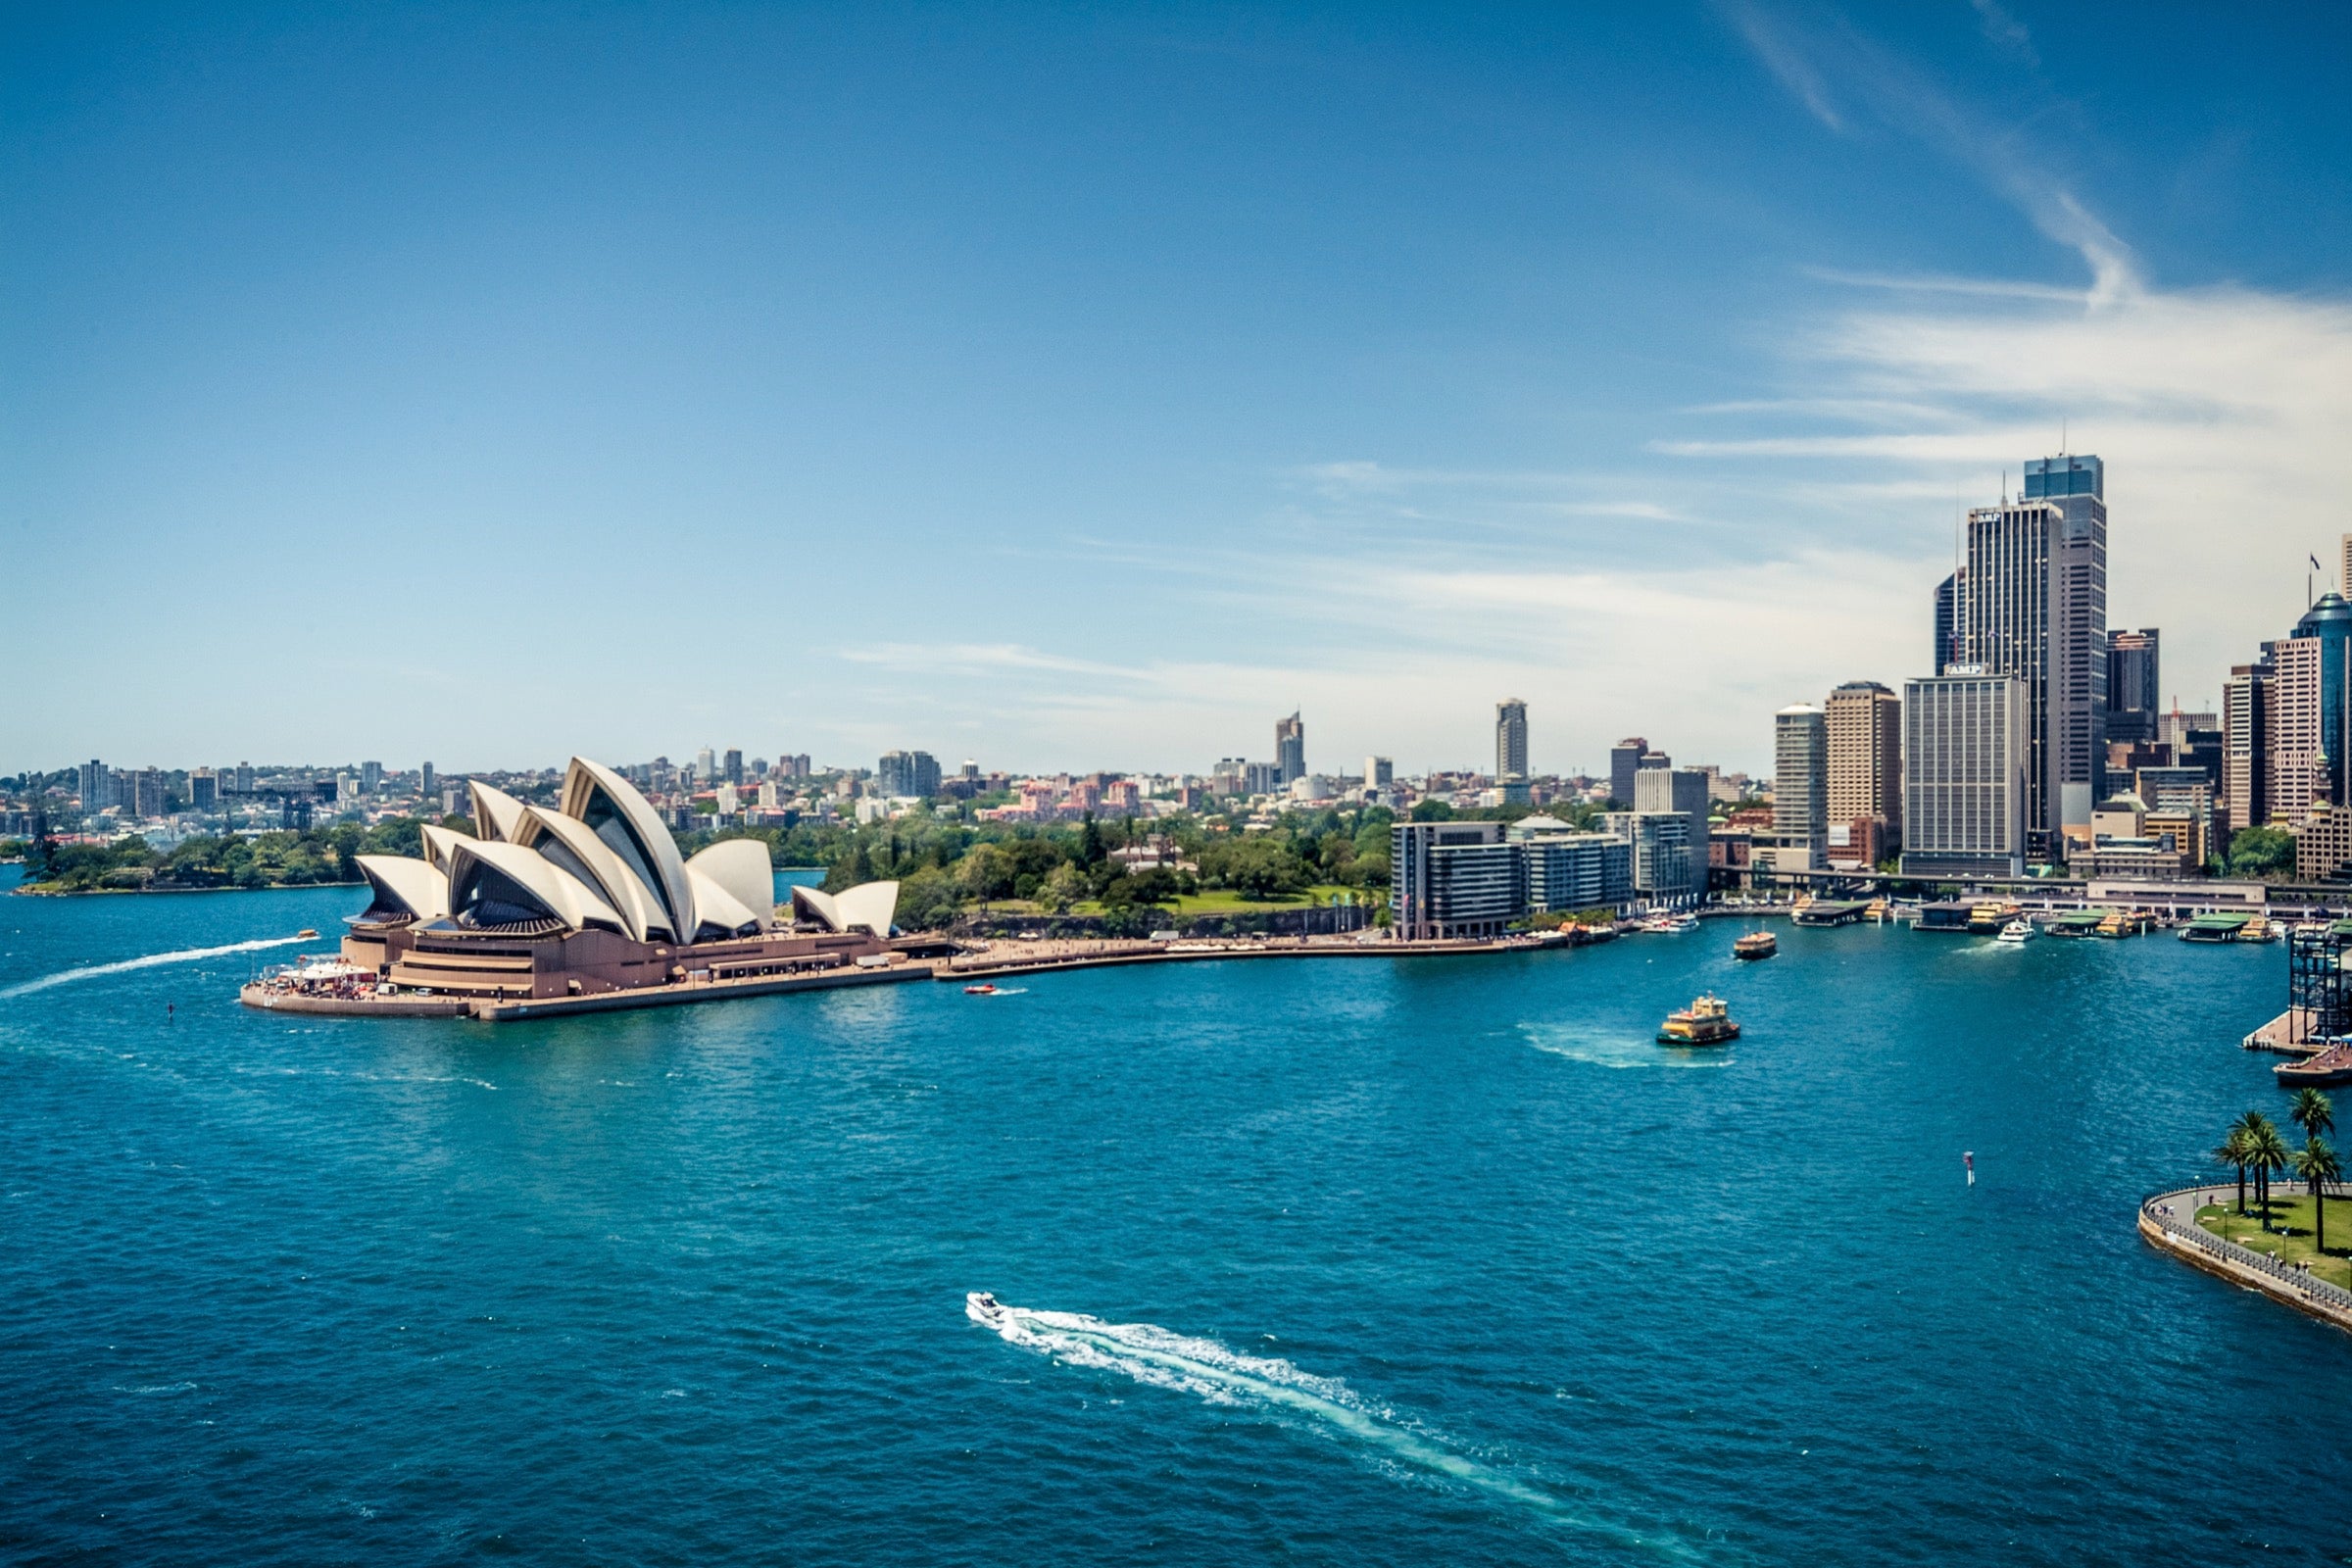 View of the Sydney harbor and the Sydney Opera House